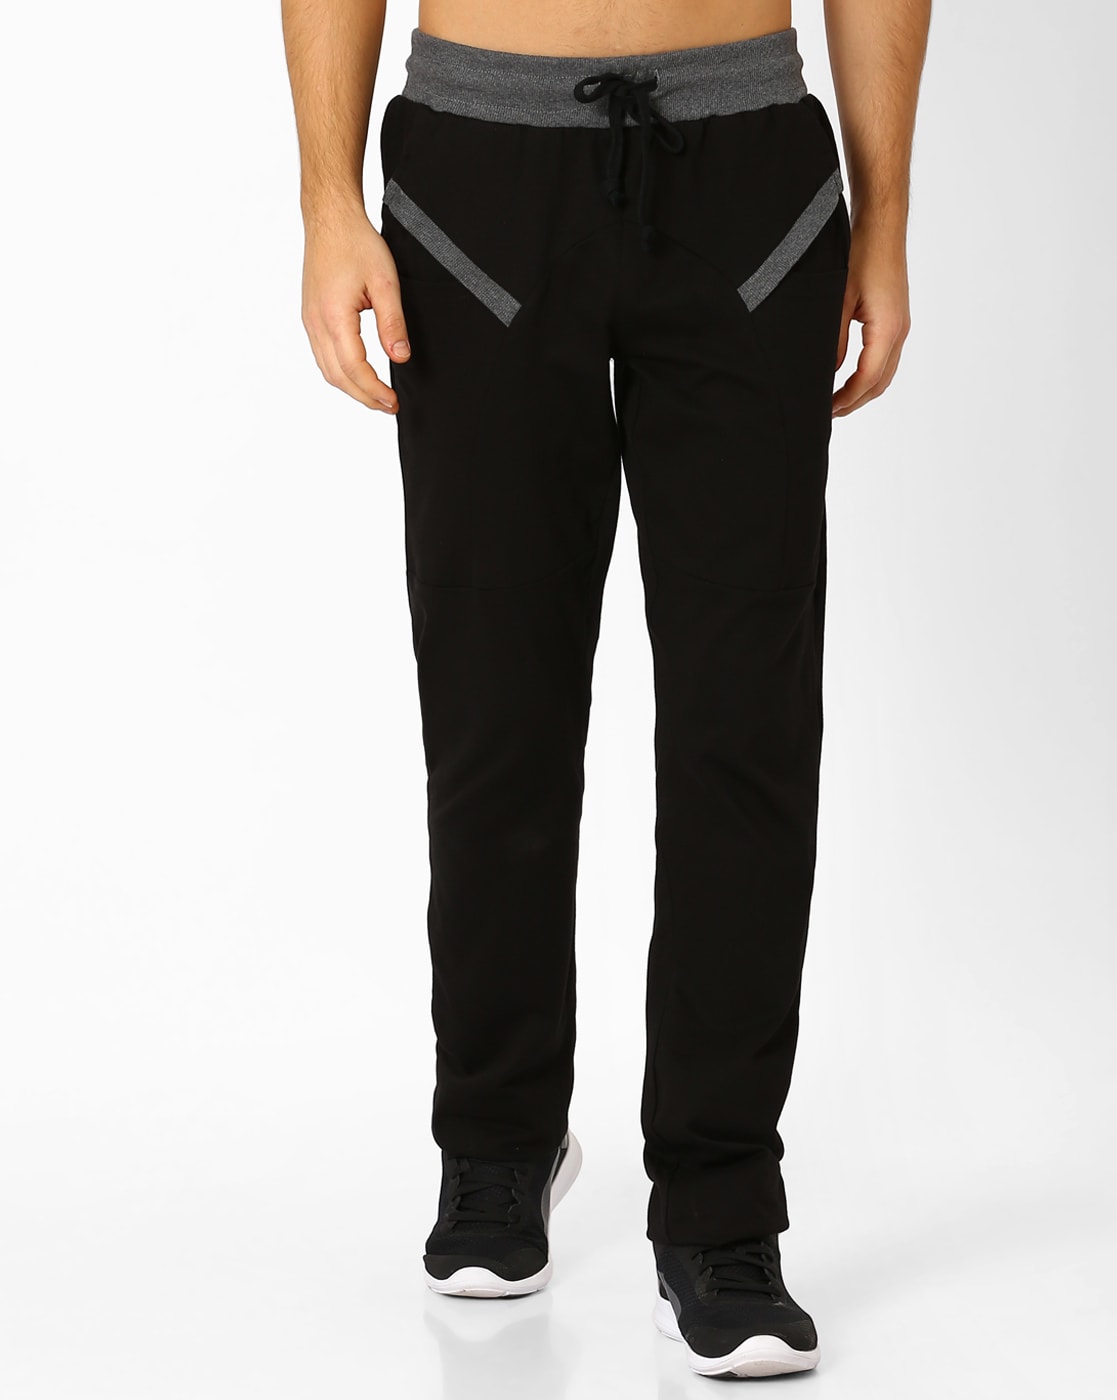 Chromozome Black Track Pants in Chandigarh - Dealers, Manufacturers &  Suppliers - Justdial